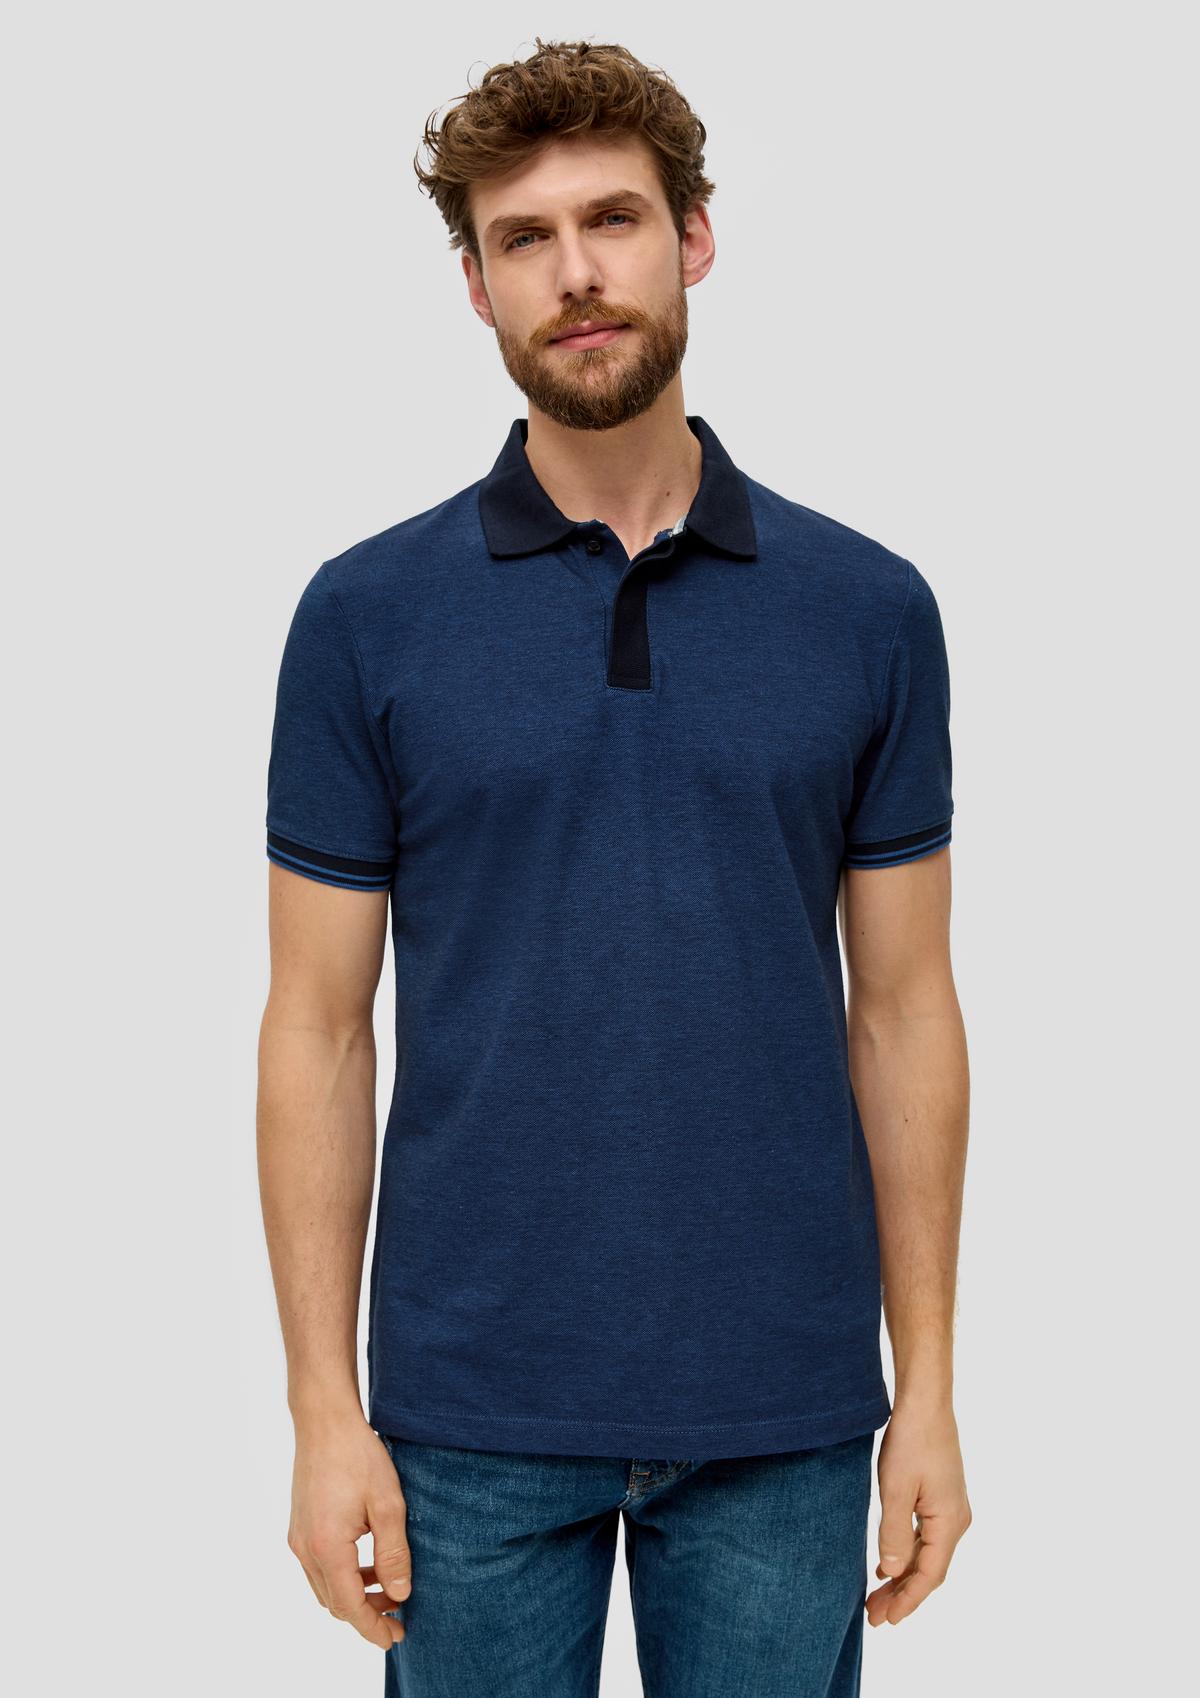 Polo shirt in a cotton blend